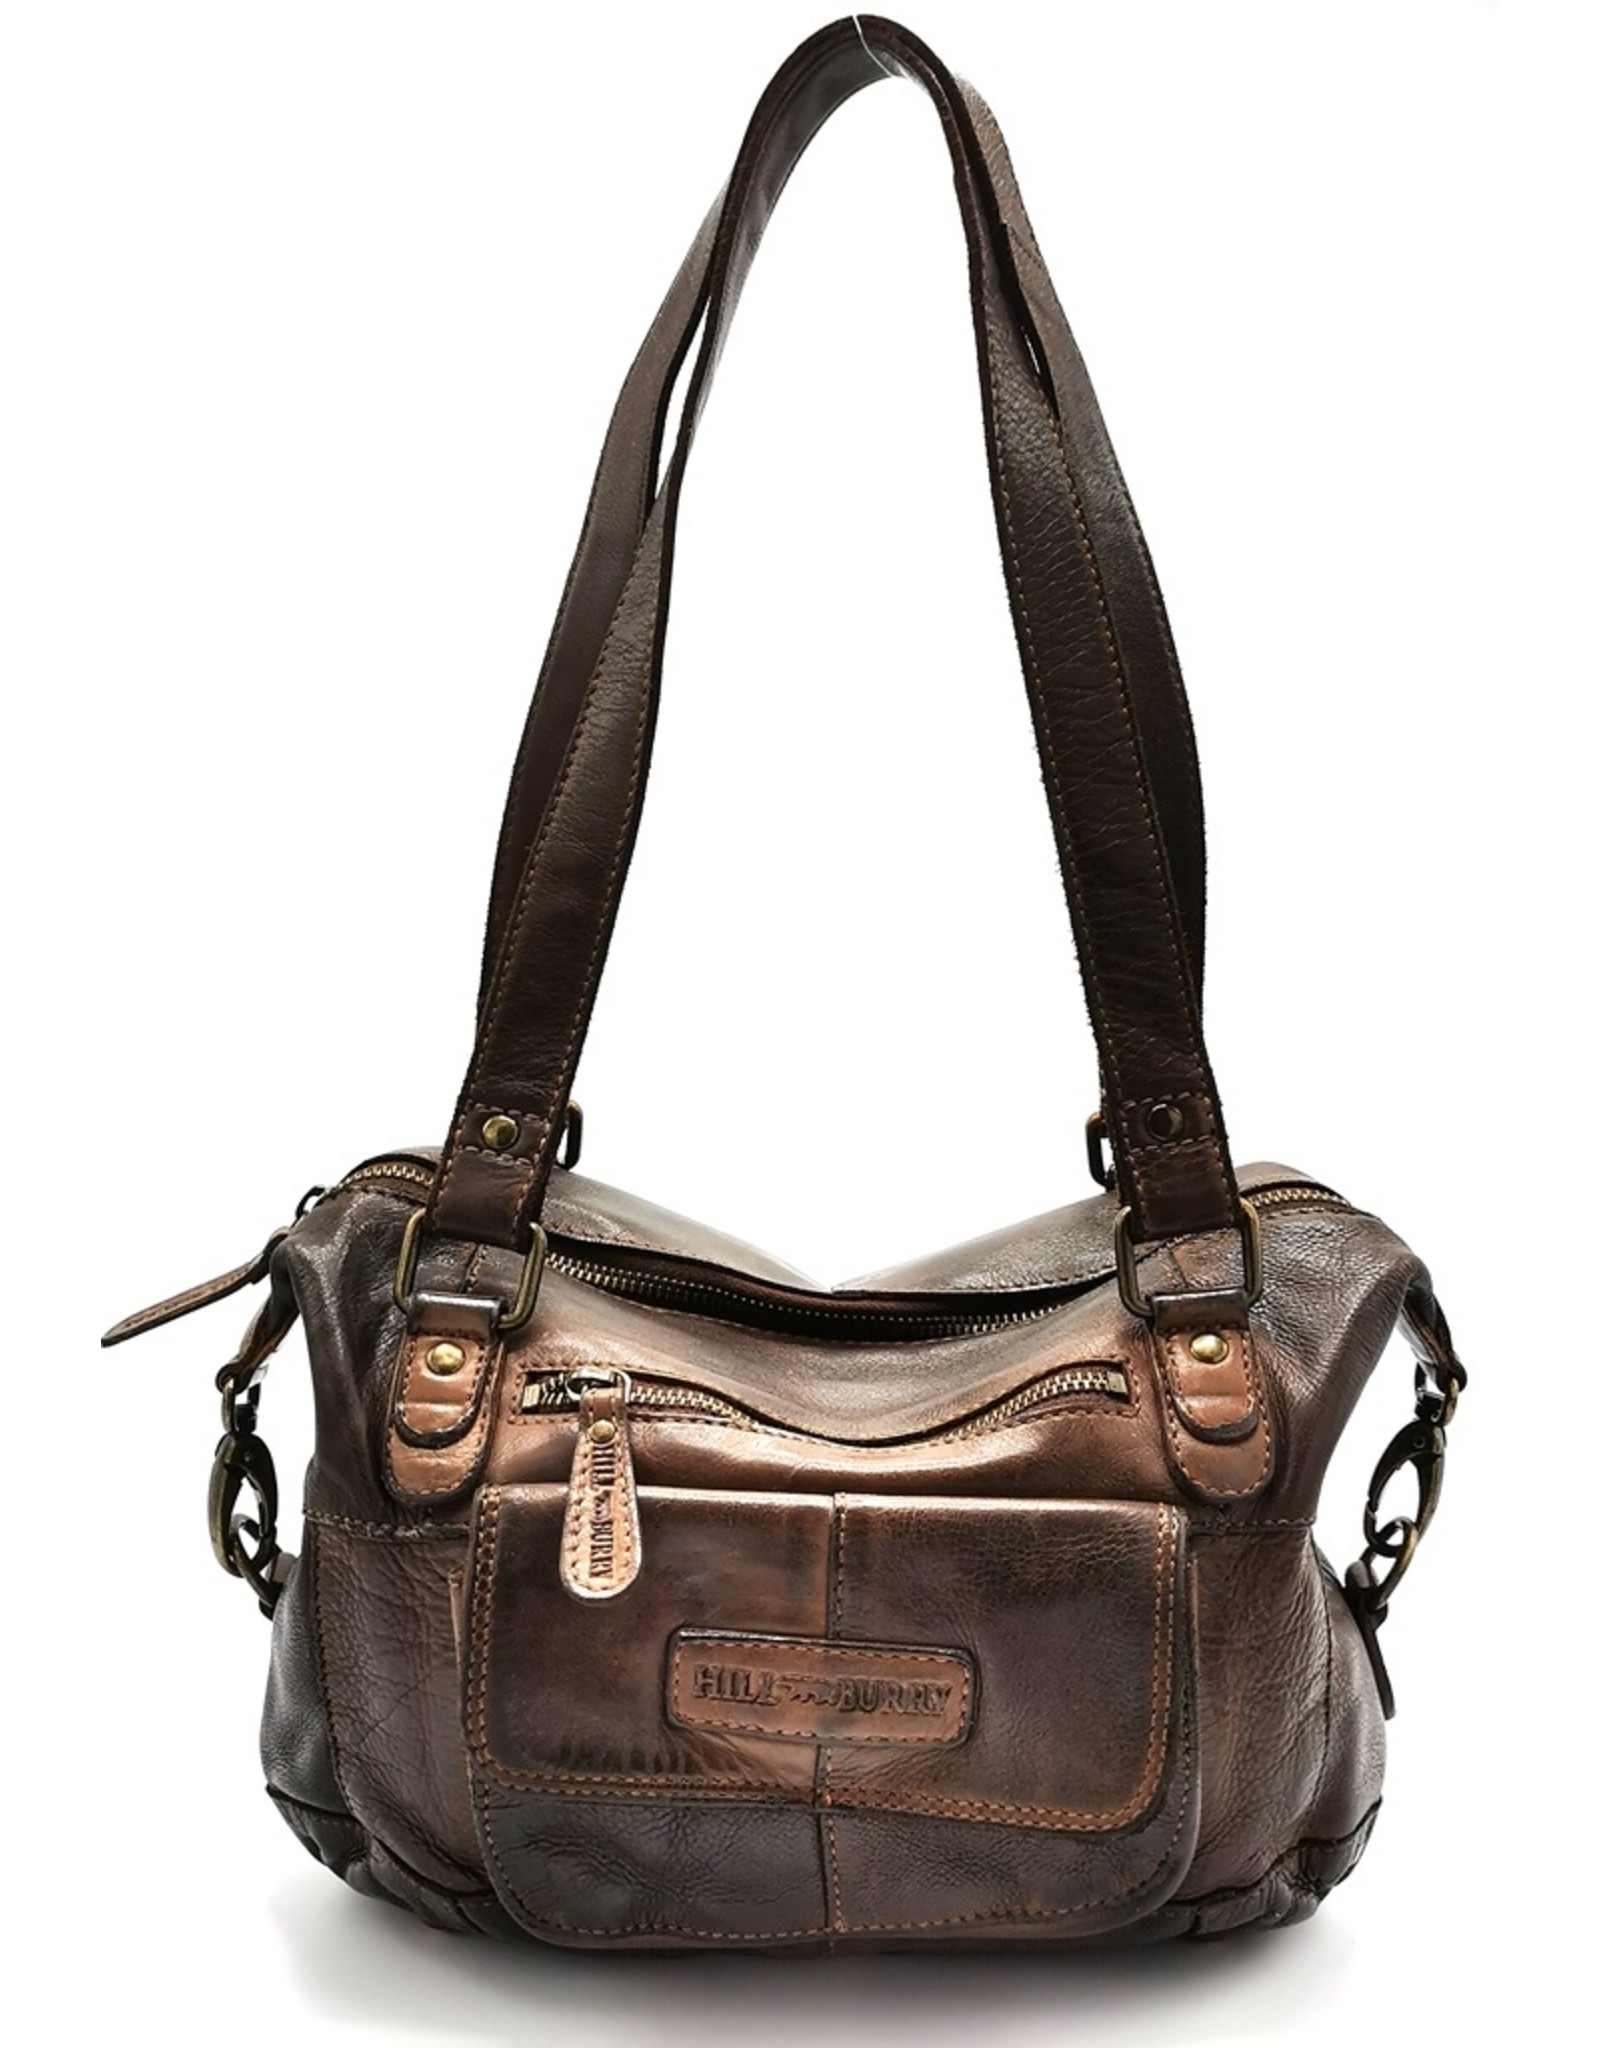 HillBurry Leather Shoulder bags  leather crossbody bags - HillBurry Shoulder Bag Washed Leather - brown